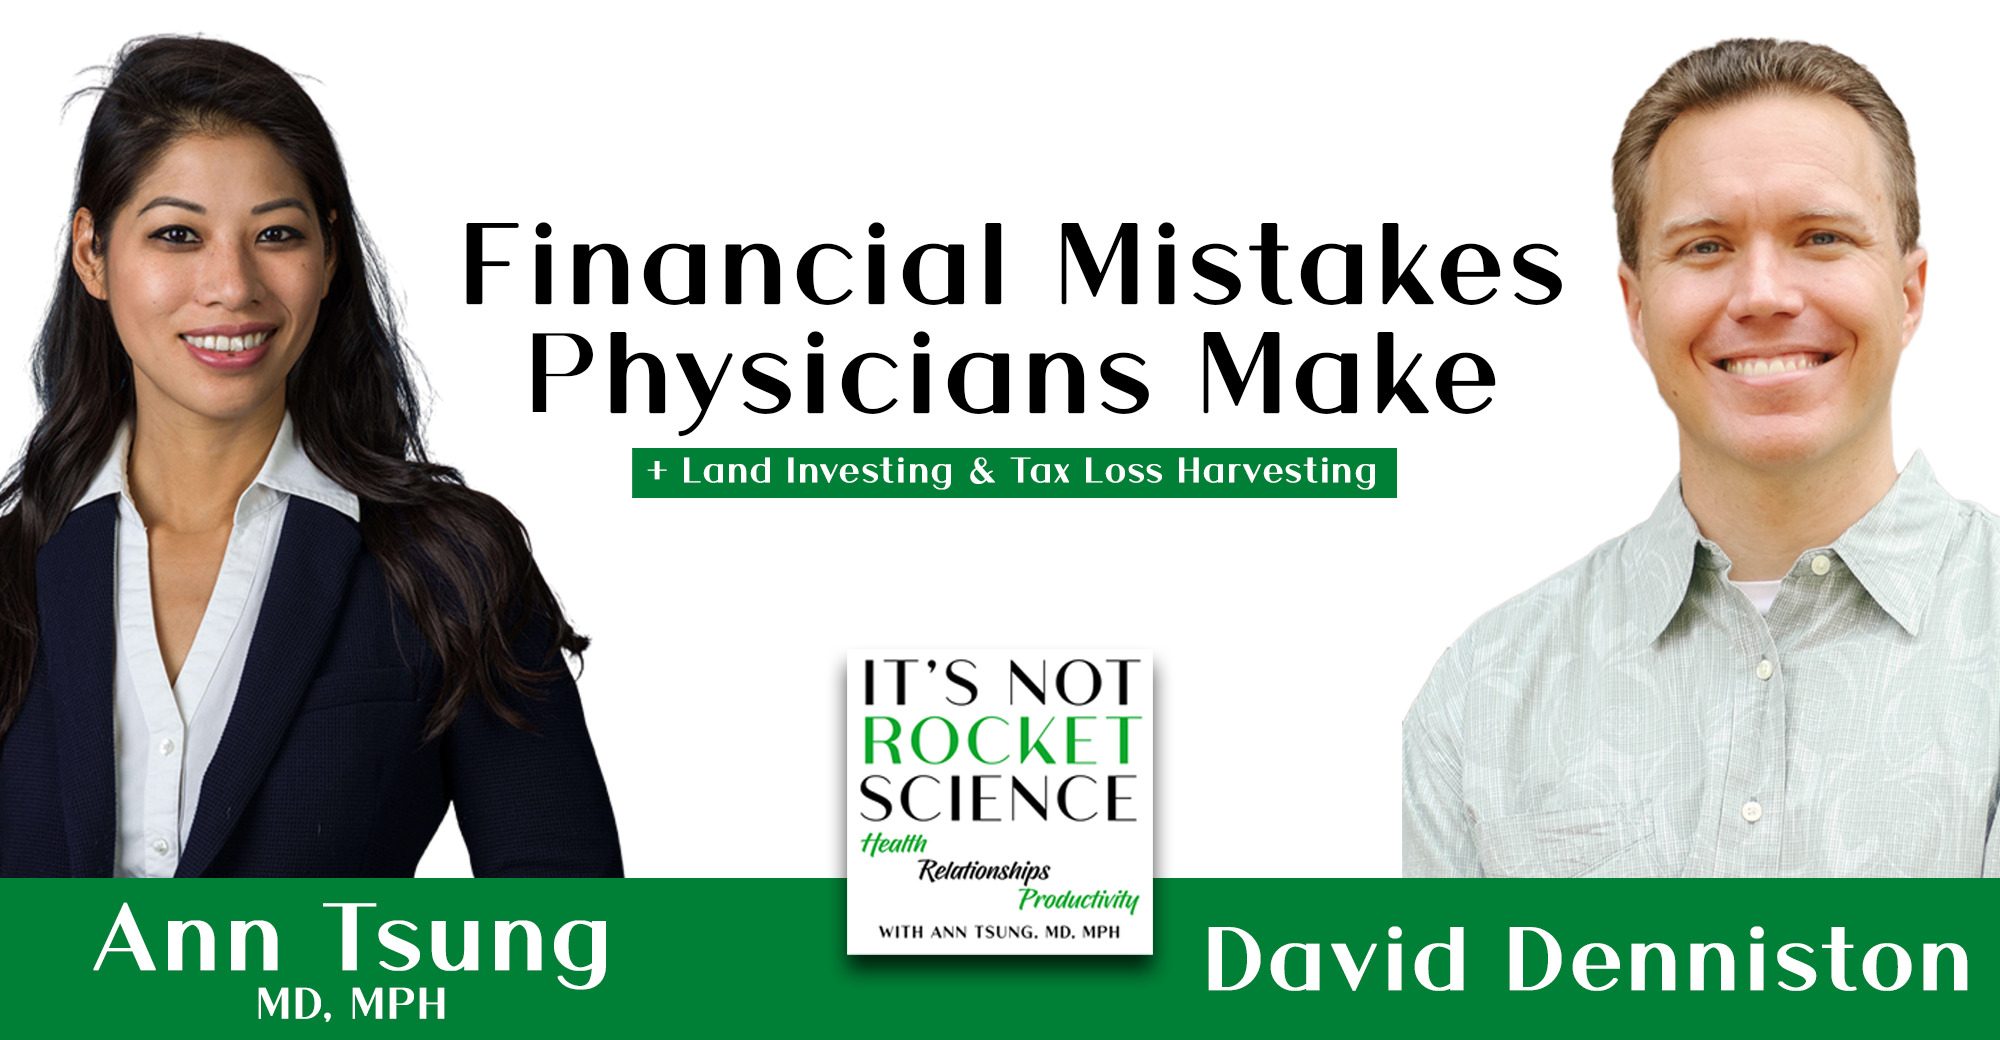 034. FINANCIAL MISTAKES PHYSICIANS MAKE + LAND INVESTING & TAX LOSS HARVESTING W/ DAVID DENNISTON